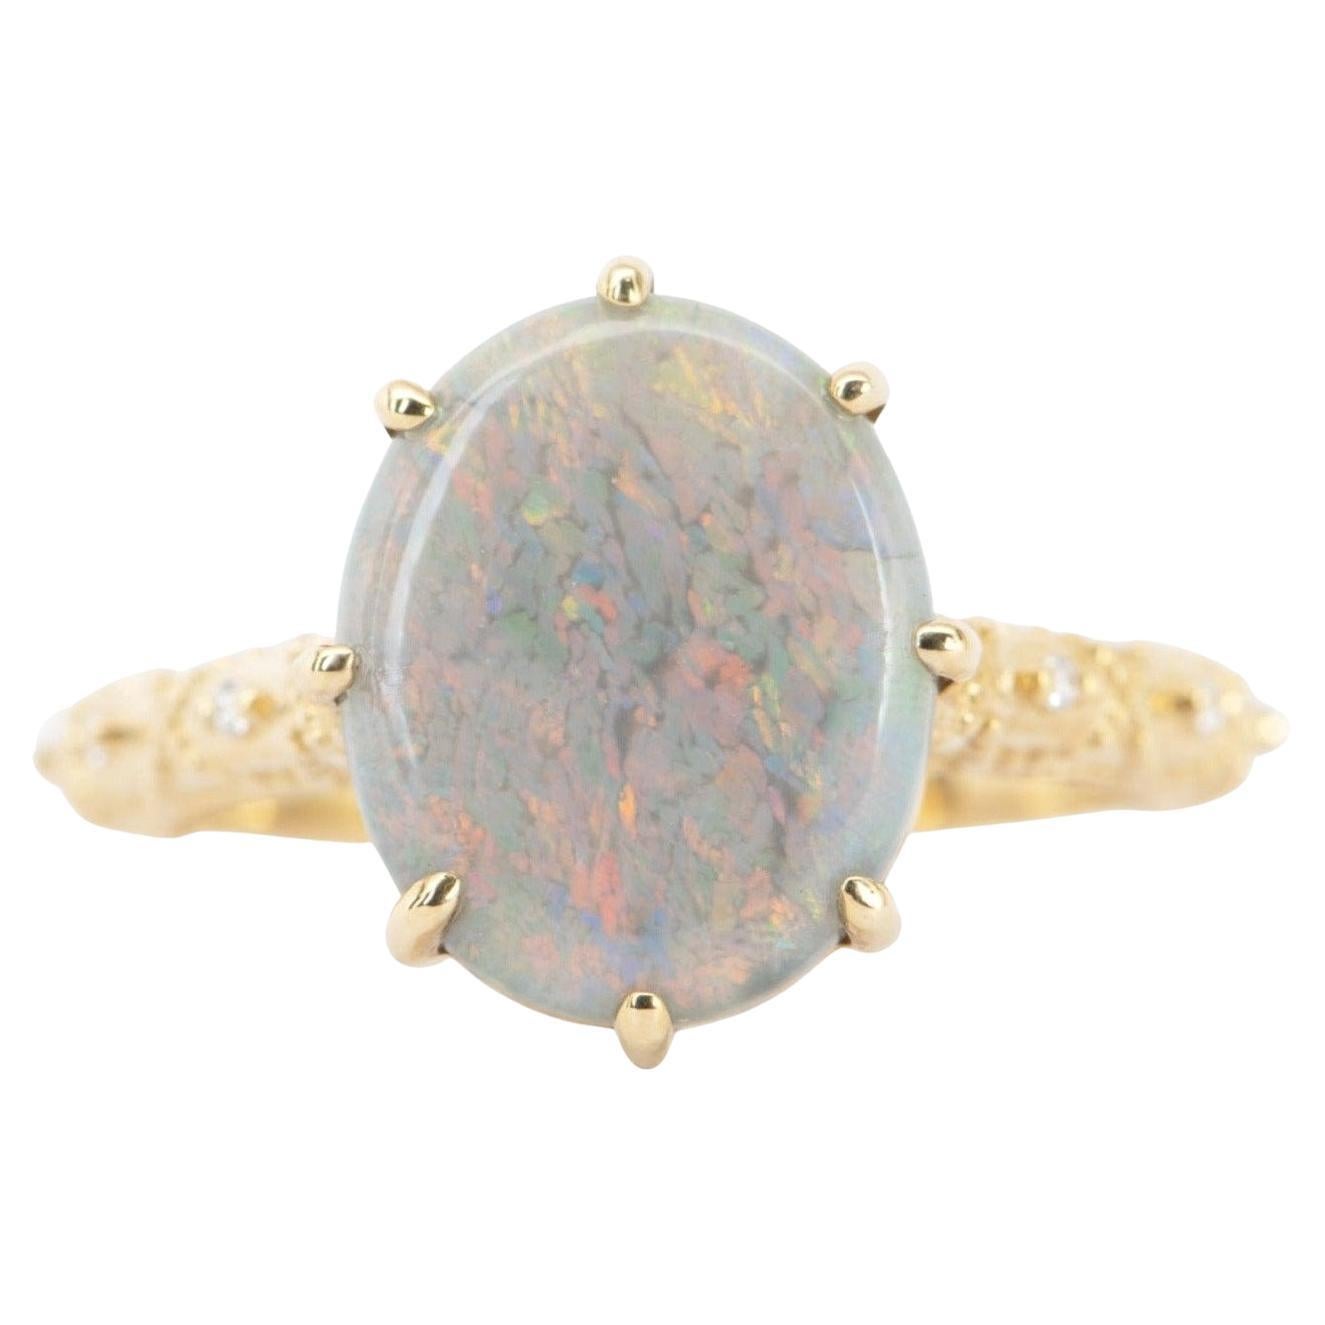 2.82ct Solid Australian Opal on Vintage Lace Band Bridal Ring Set 14k Gold R6495 For Sale